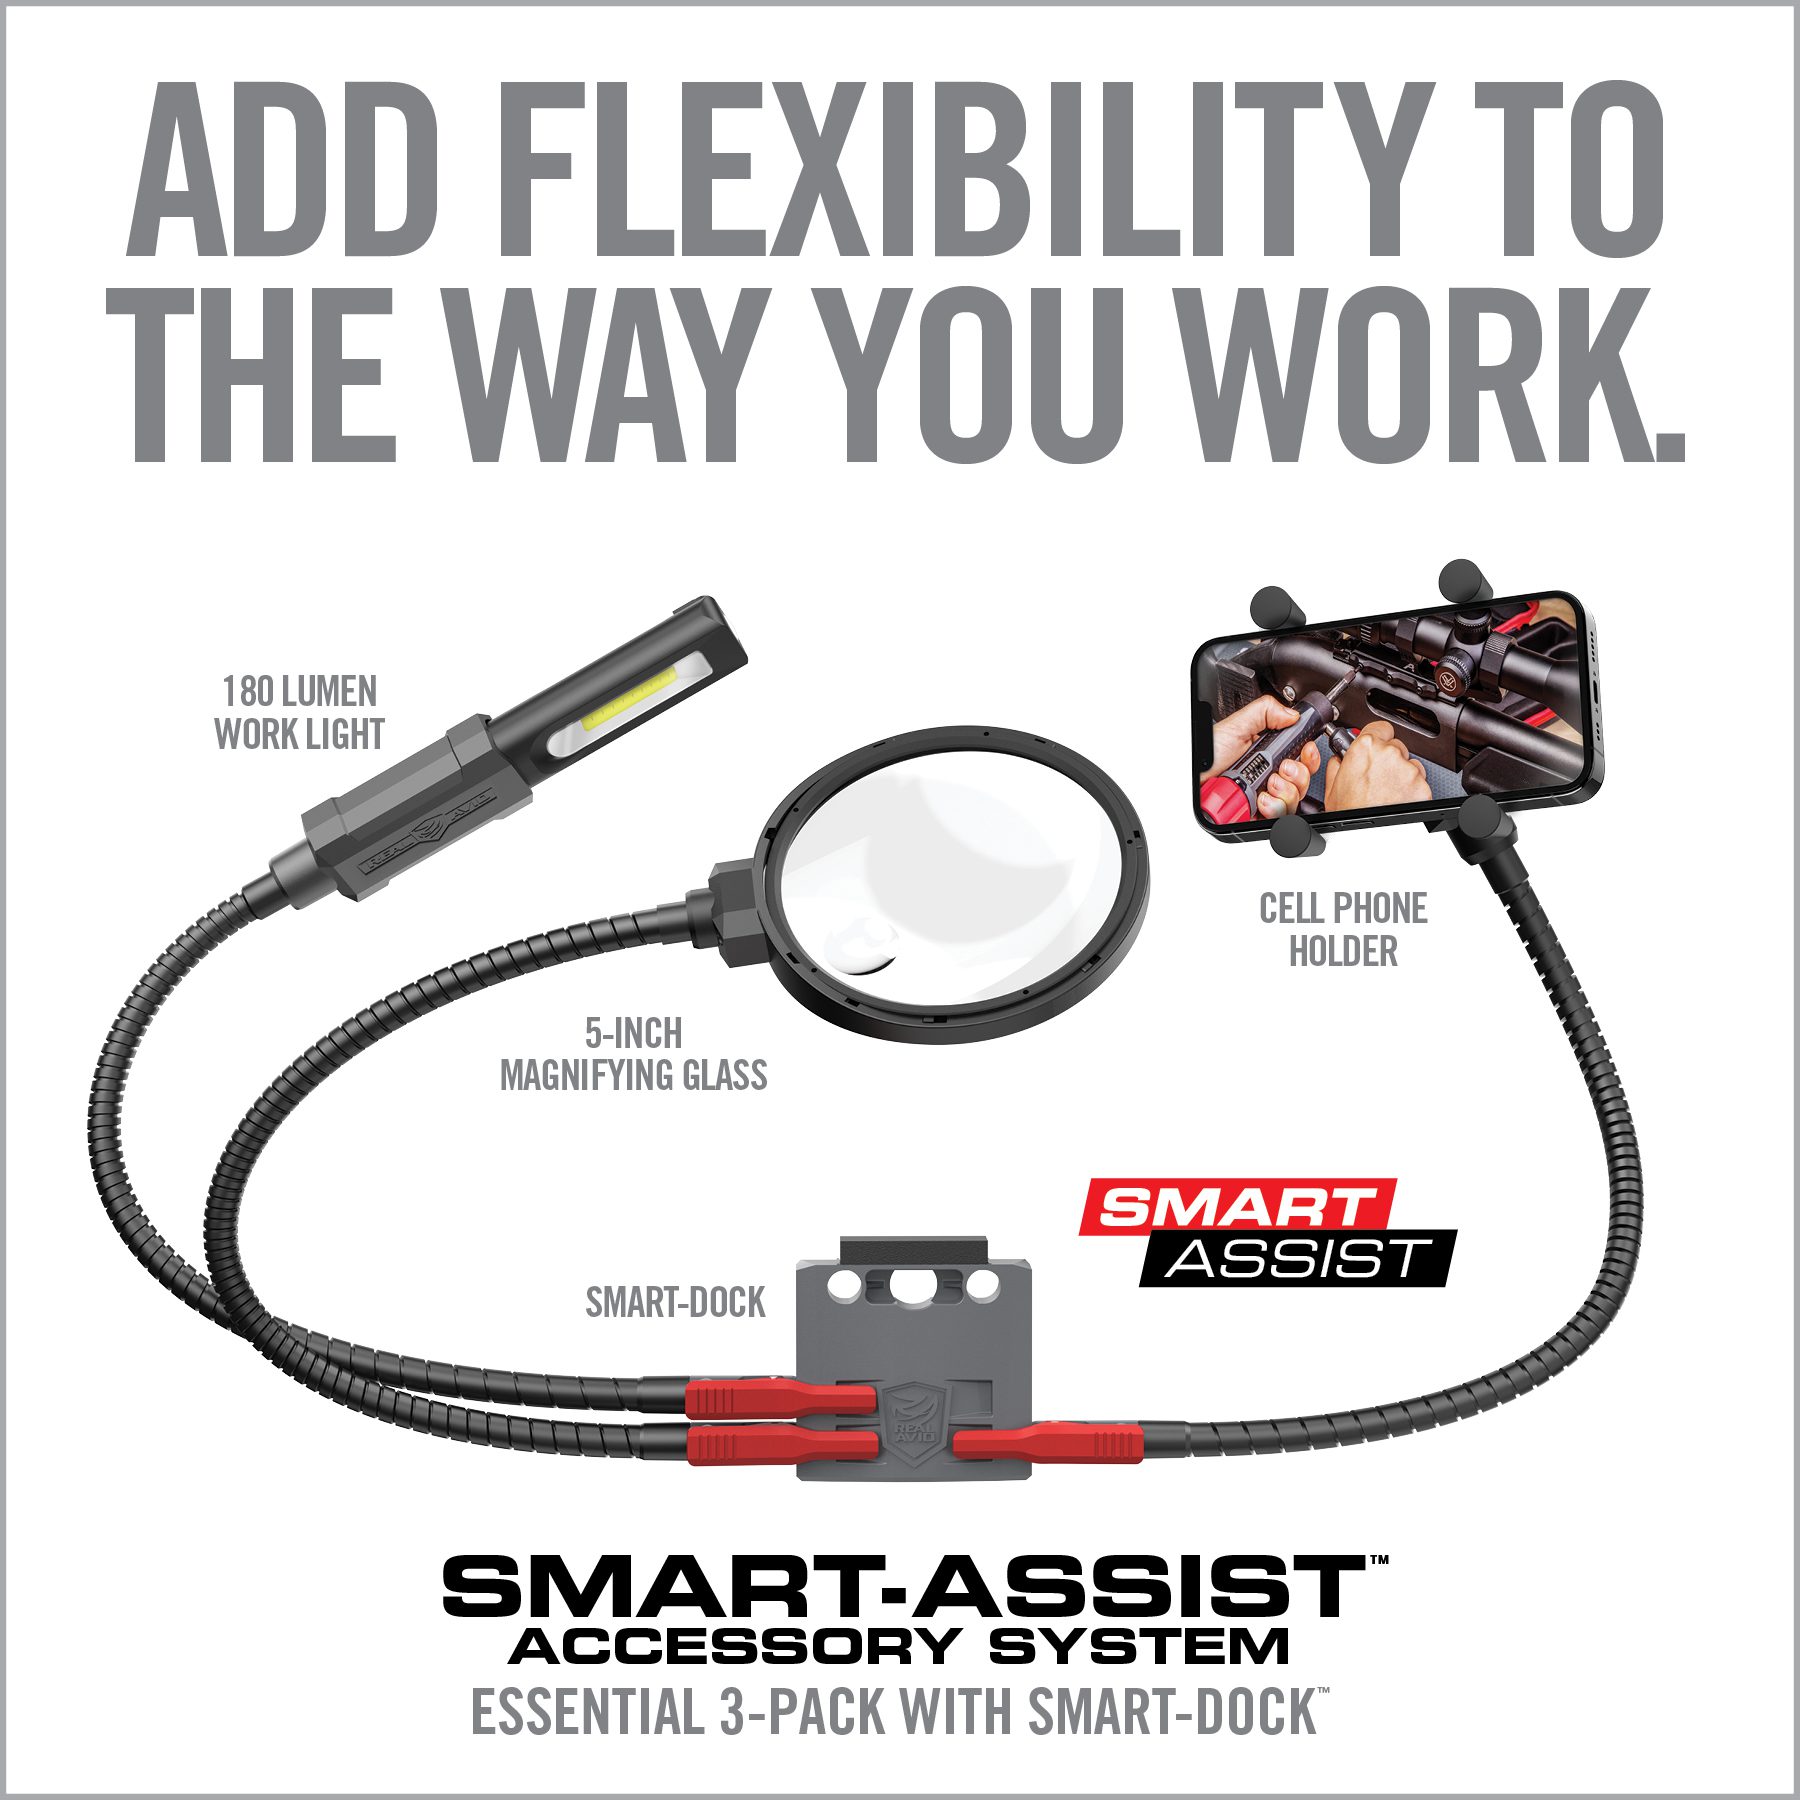 the smart assist advertises that you can charge your smartphone